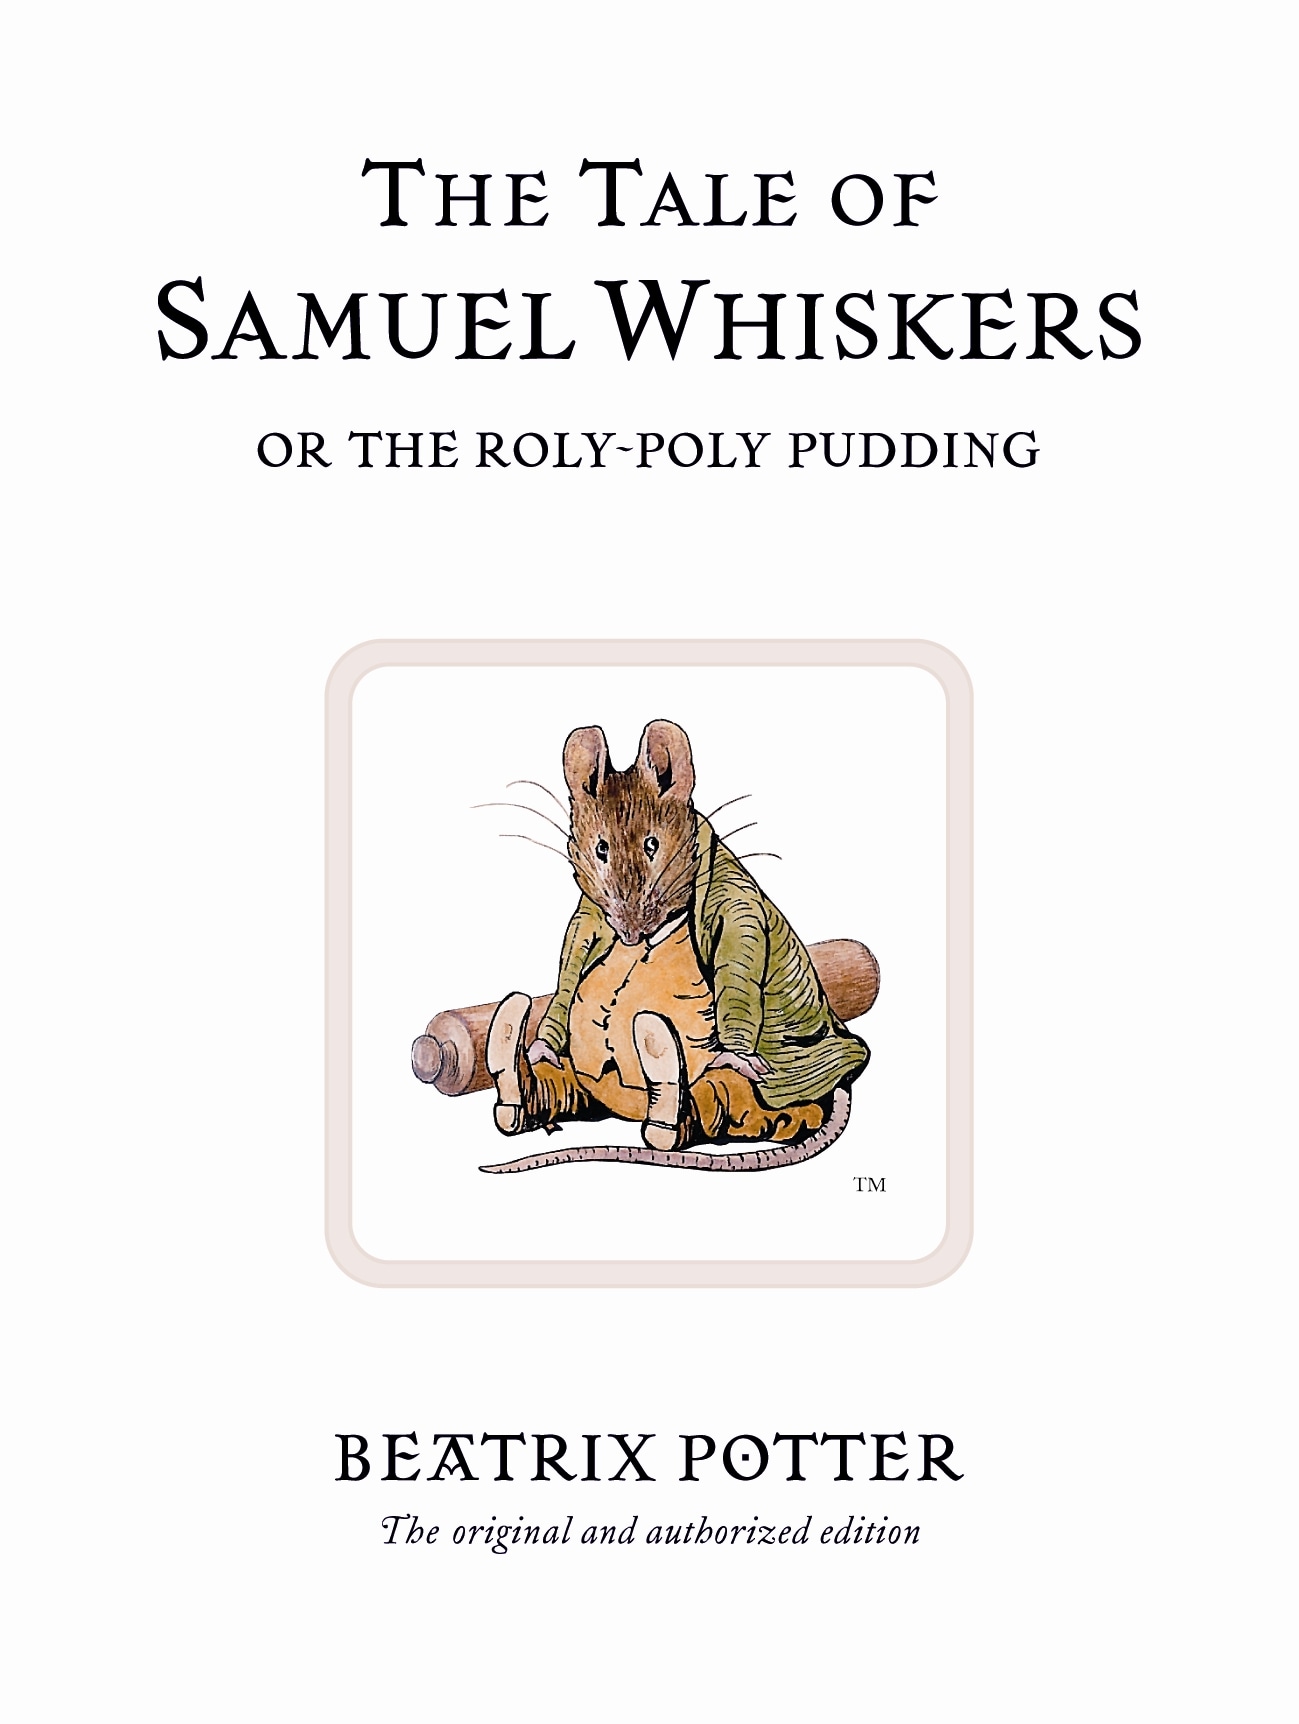 Book “The Tale of Samuel Whiskers or the Roly-Poly Pudding” by Beatrix Potter — March 7, 2002